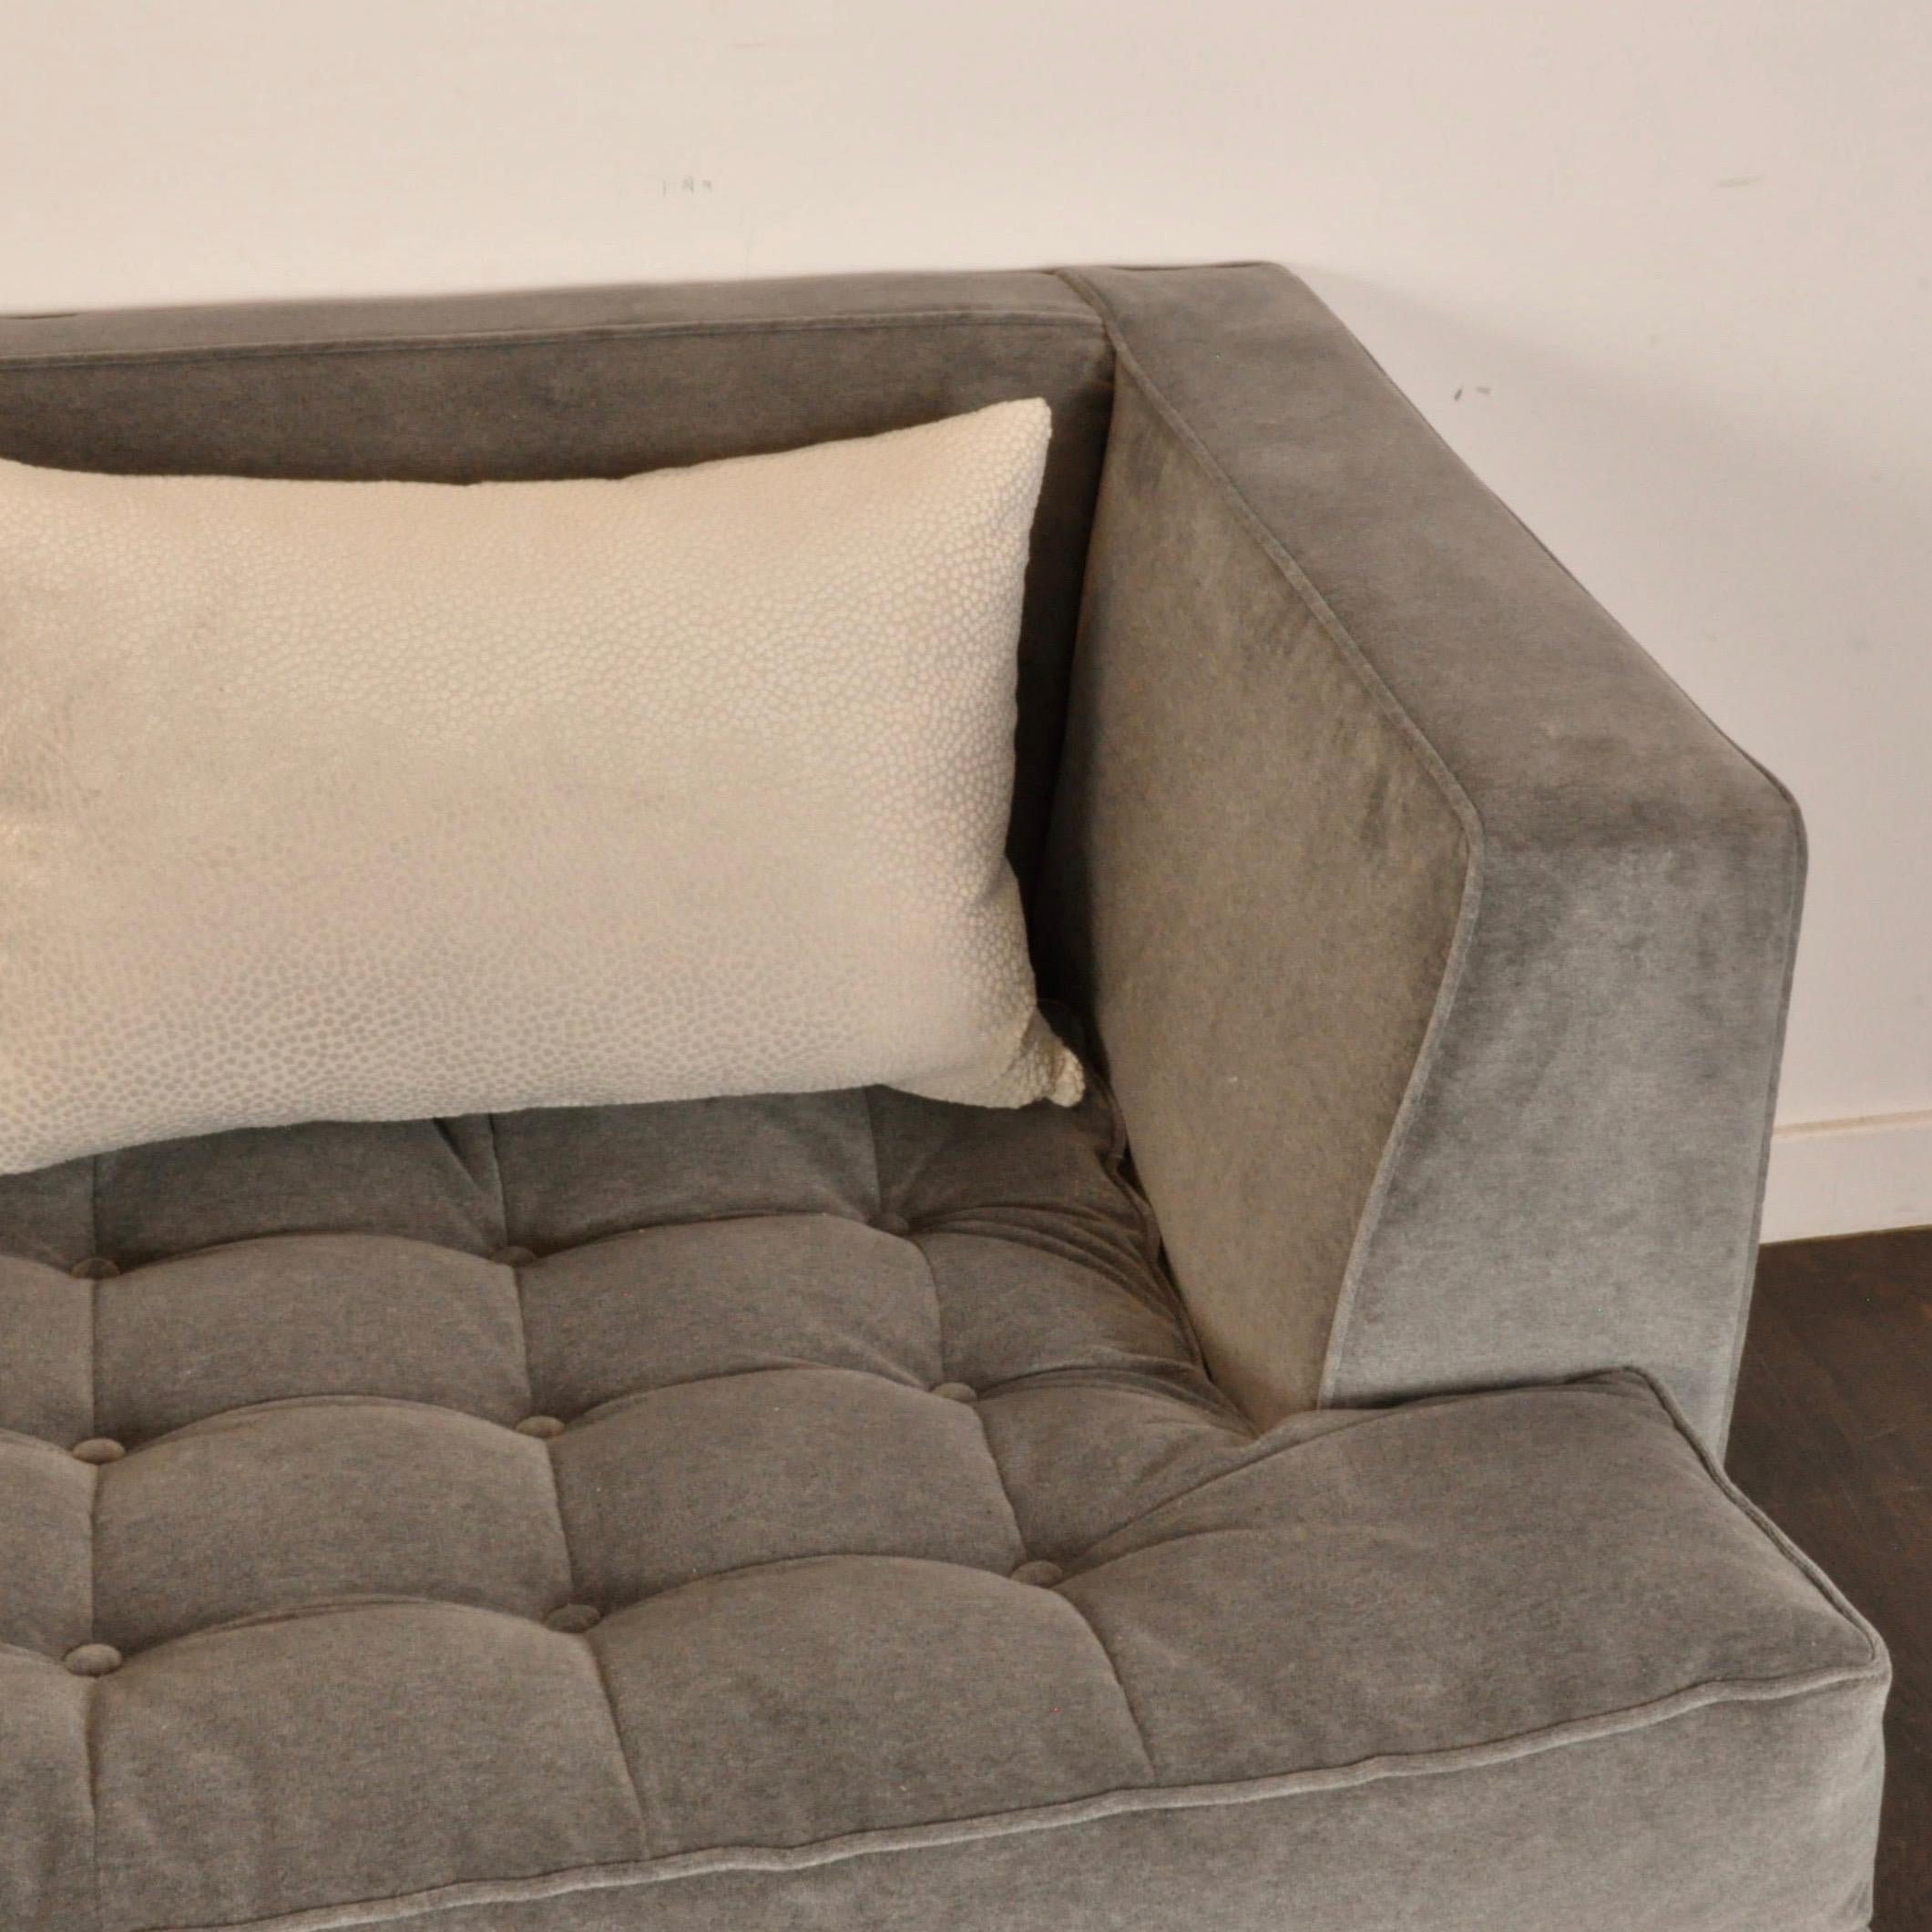 This sofa is solidly built by Directional, one of the premier furniture makers in the country. It has been newly recovered in a medium grey velvet. Designed by Larry Laslo, who has worked as an interior designer illustrator, visual merchandiser, art